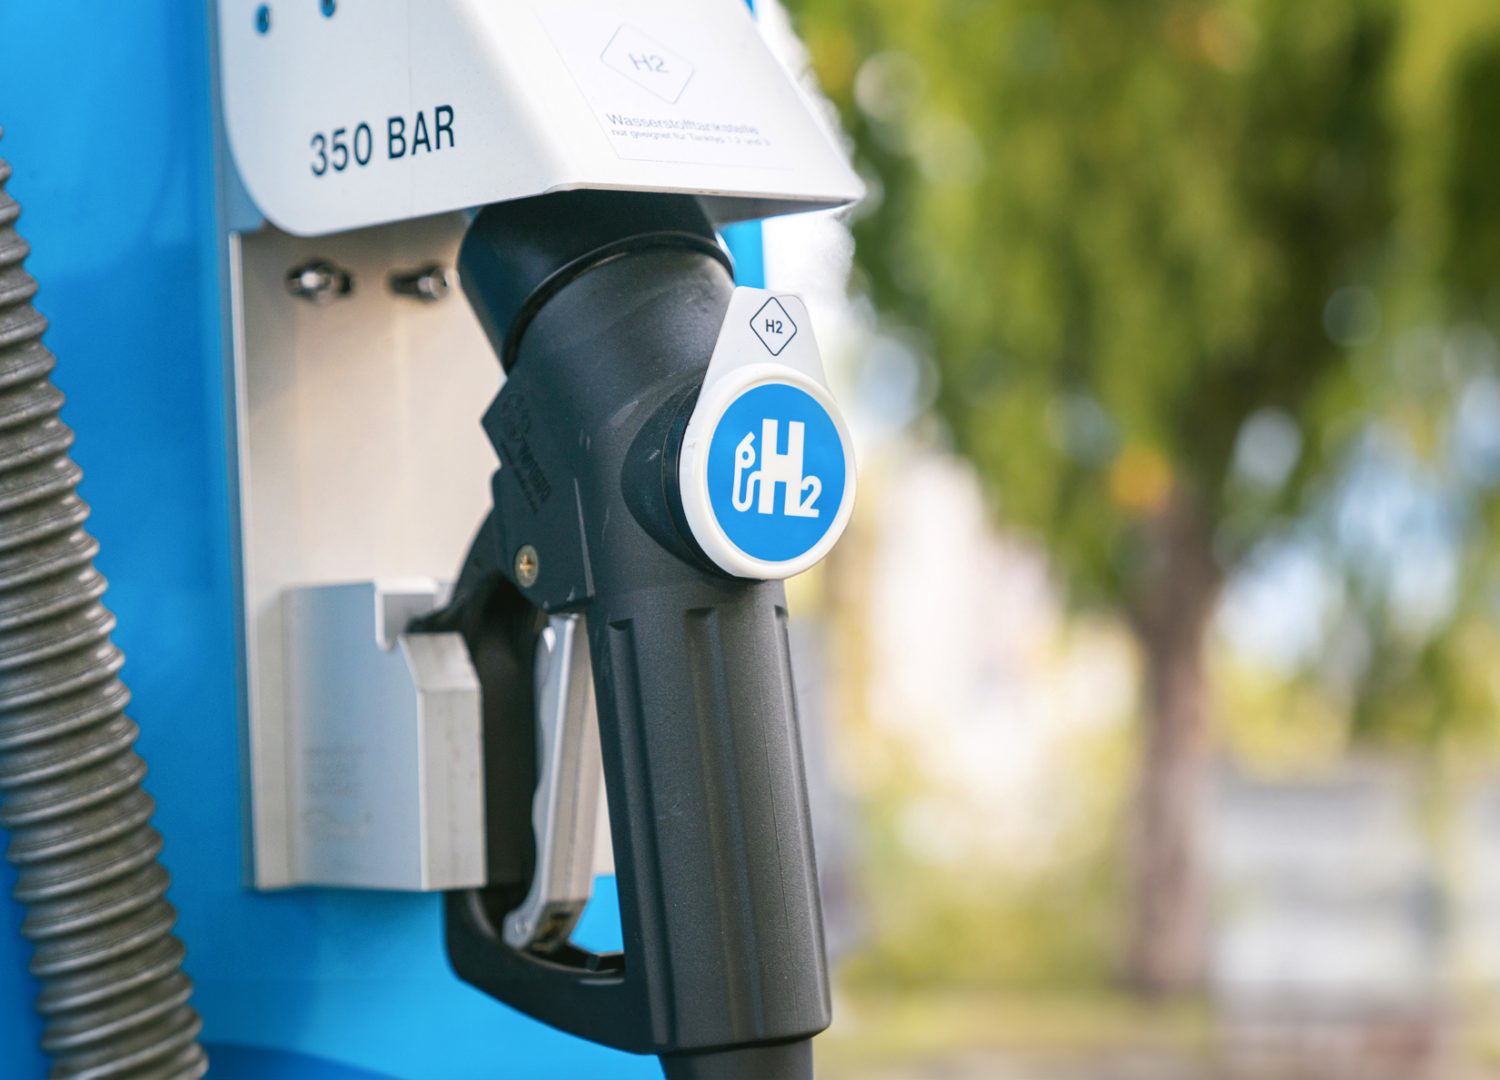 Aachen / Germany - January 31 2020: hydrogen logo on gas stations fuel dispenser. h2 combustion engine for emission free eco friendly transport.